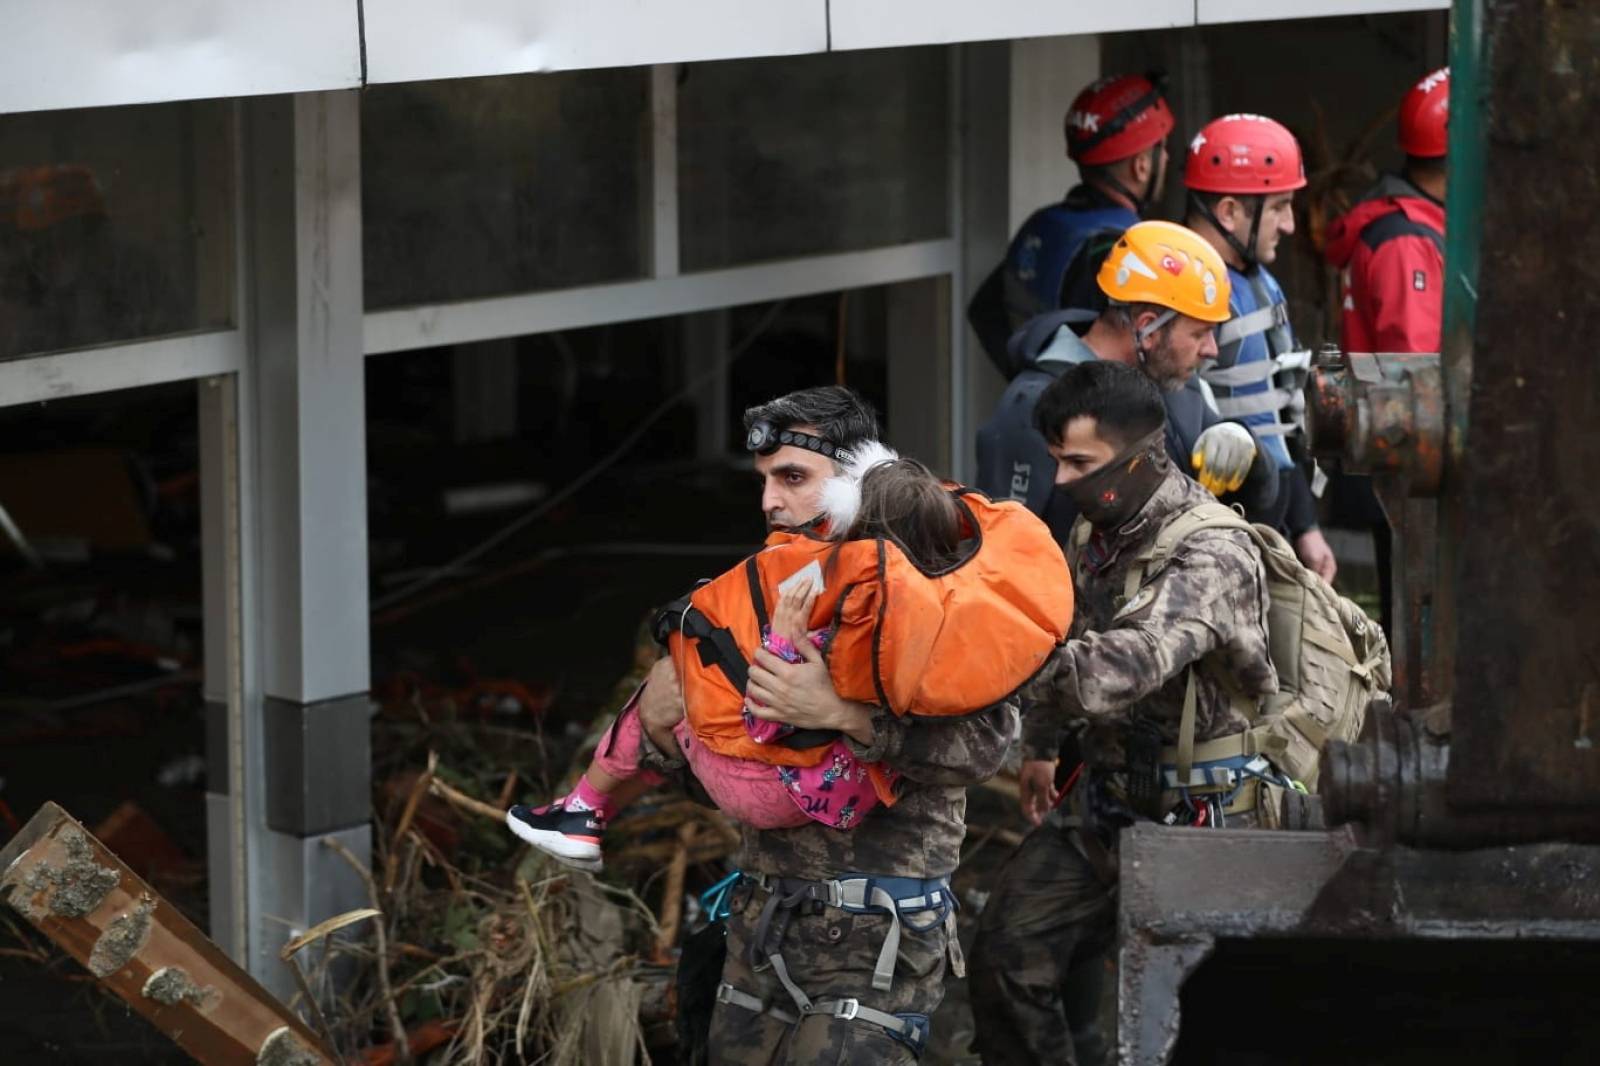 Death toll from northern Turkey floods rises to 27